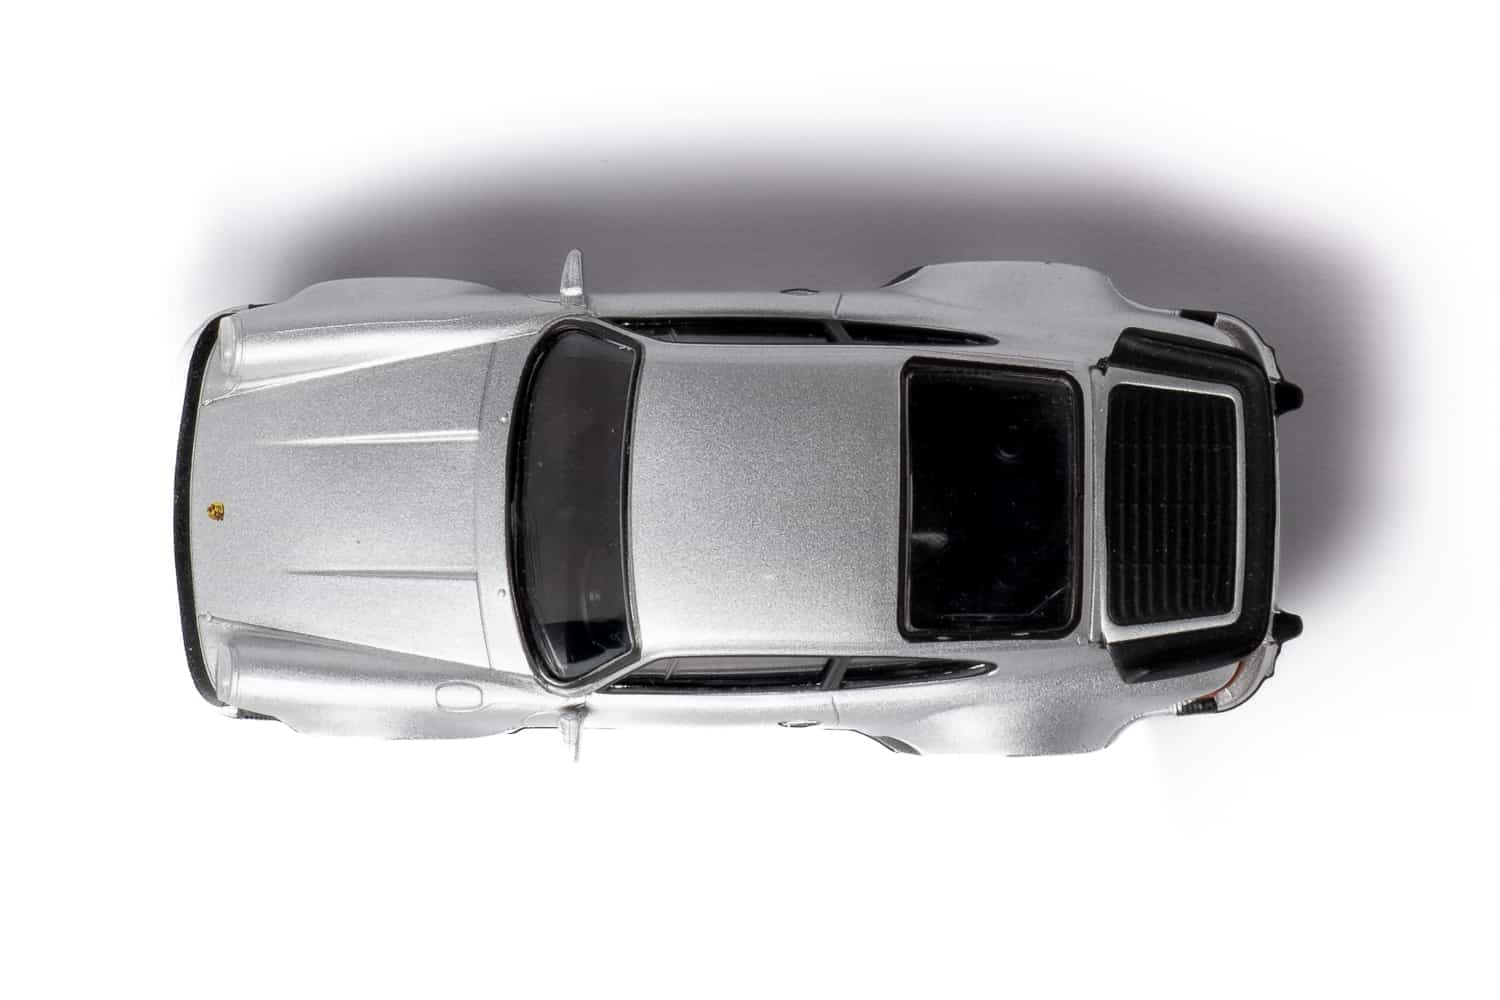 Top View of Porsche 911 Turbo White Background for Amazon Listing